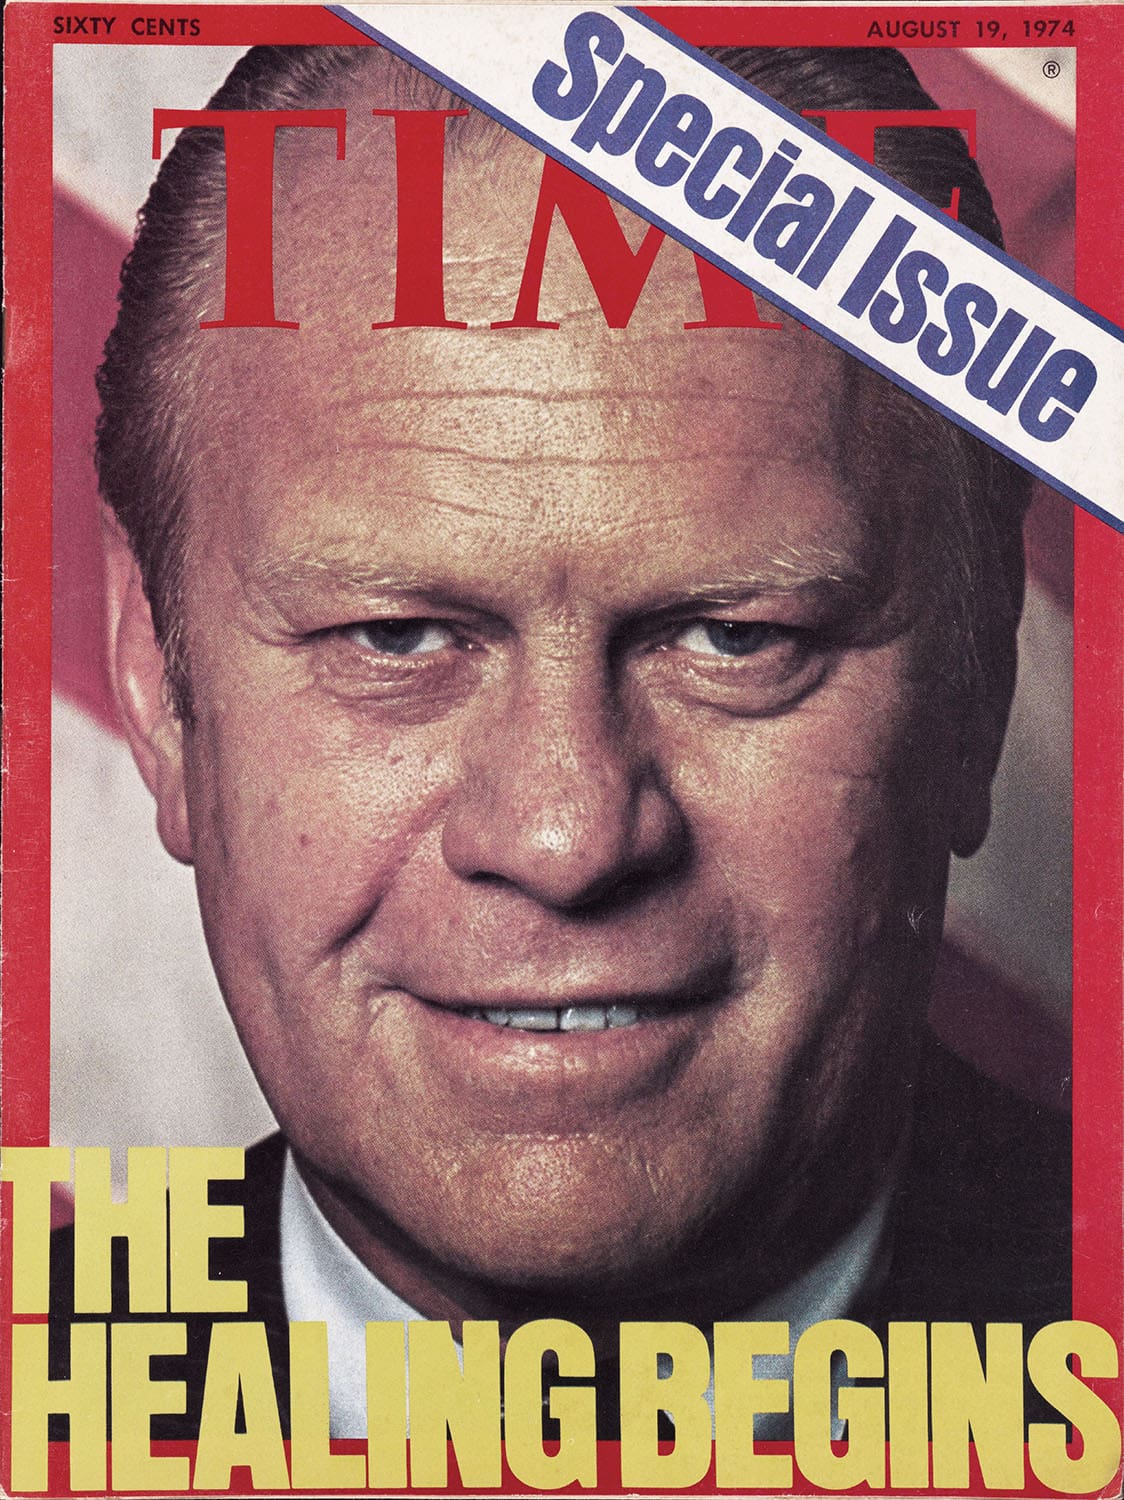 Kennerly’s TIME Magazine cover of Gerald R. Ford, the 38th President of the United States of America